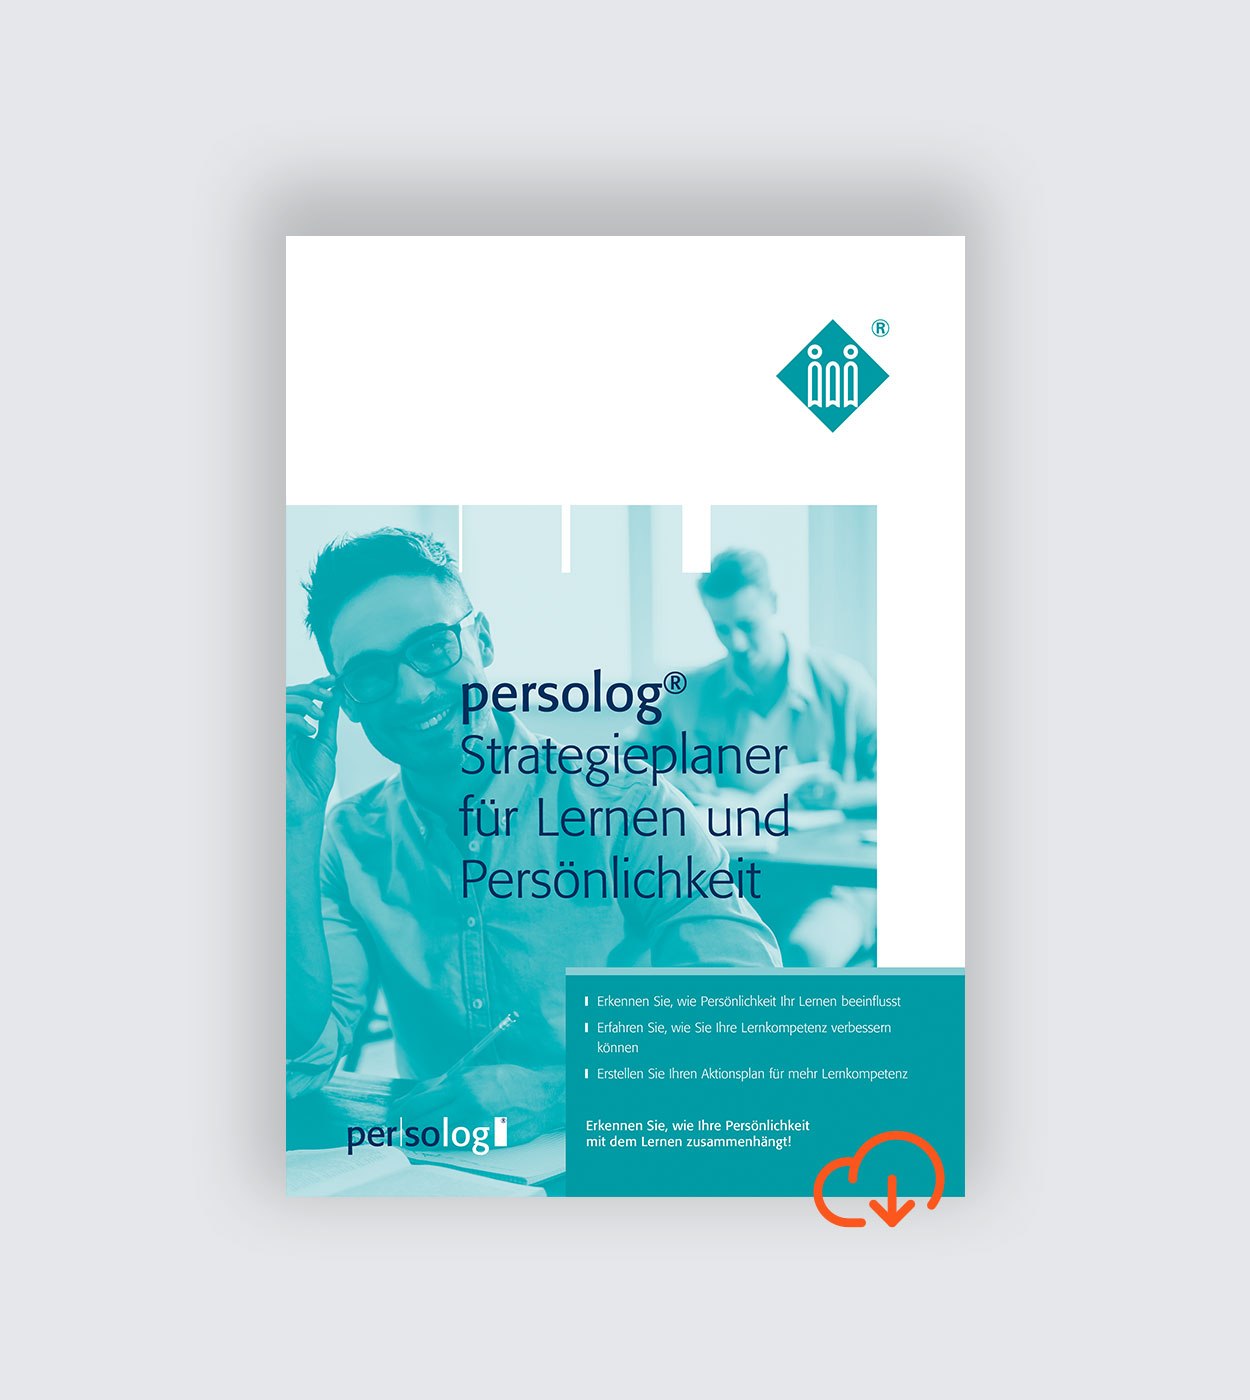 persolog® Strategy Planner for Learning and Personality online